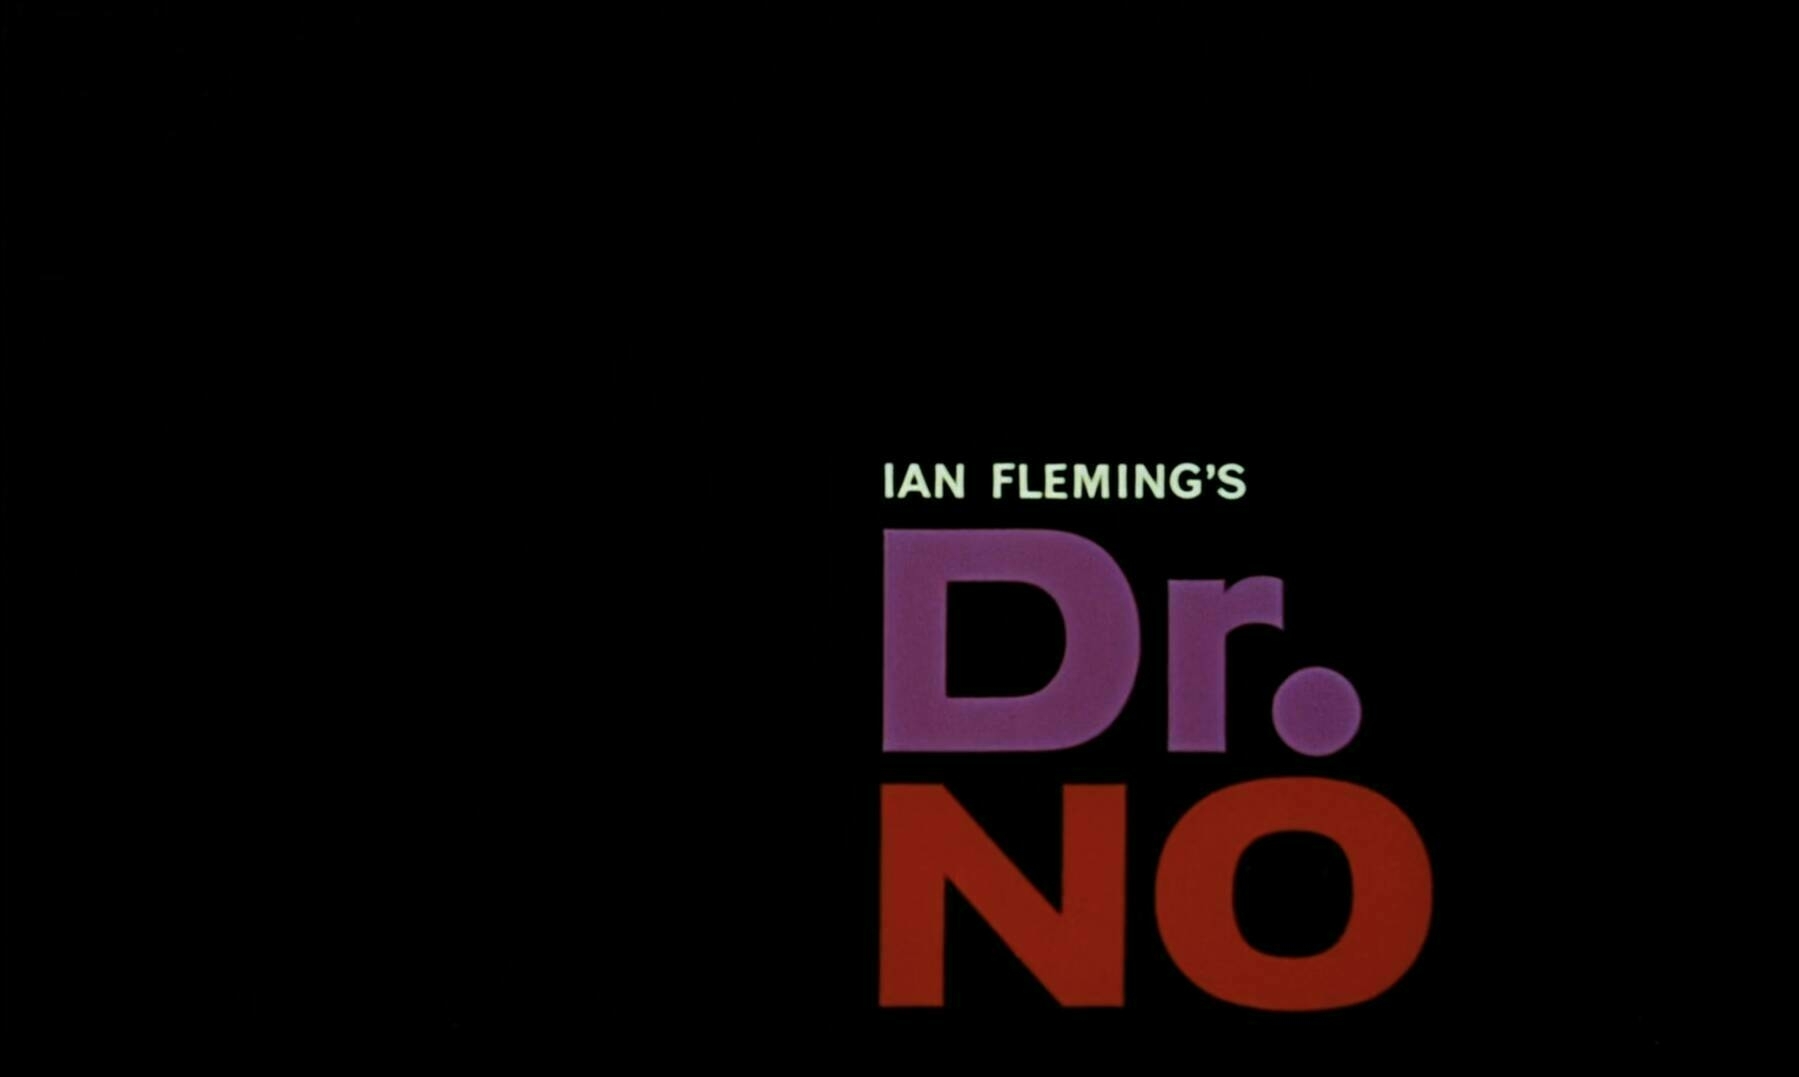 The title card for the film, Dr. No.